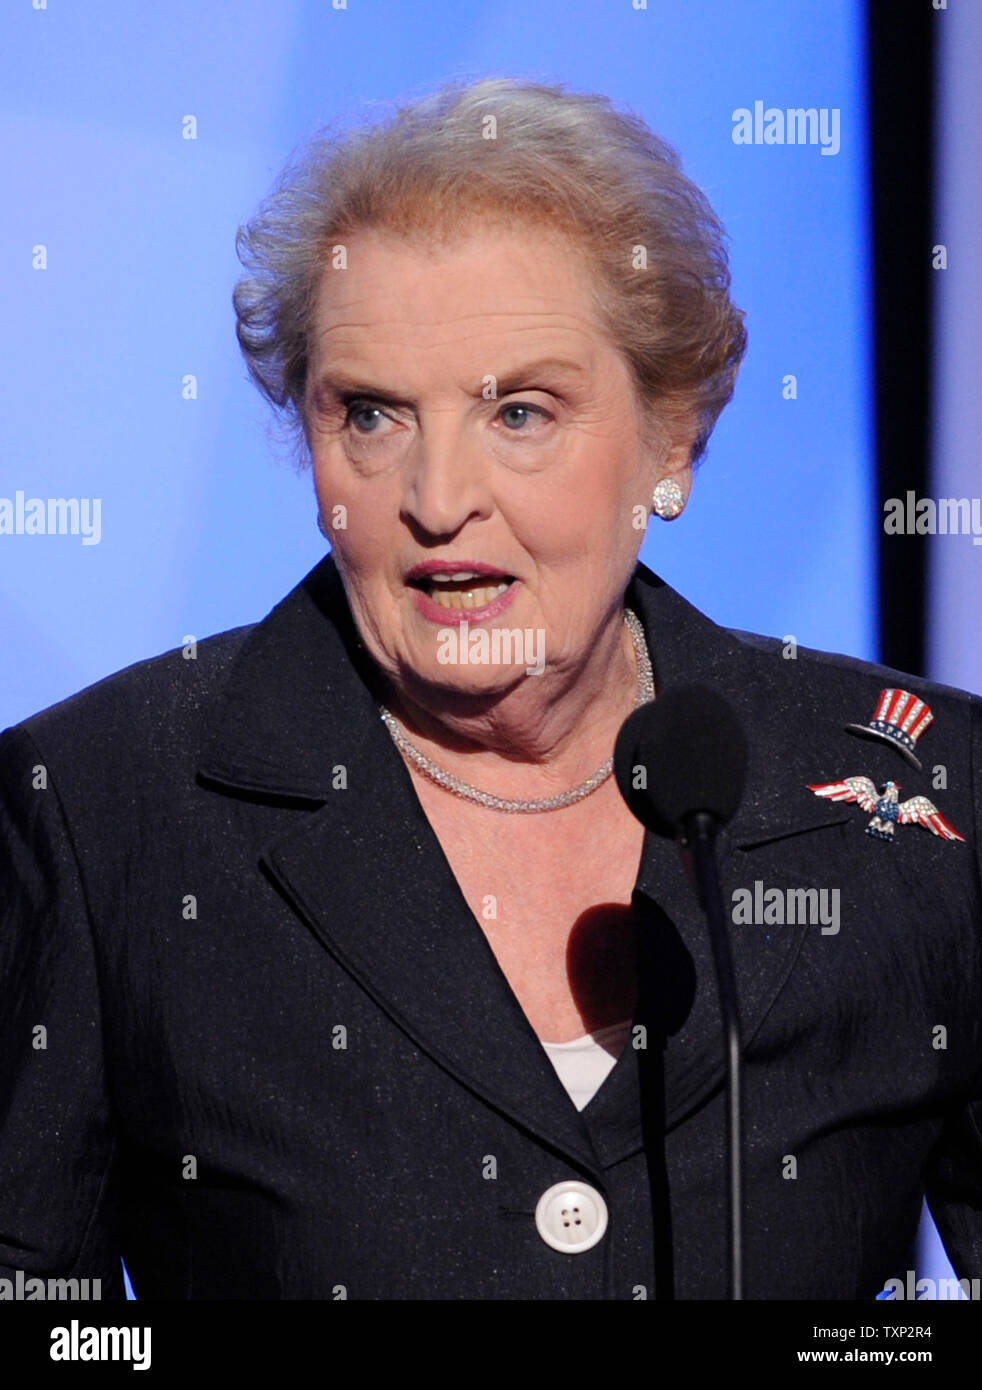 Former Secretary of State Madeline Albright delivers remarks during the third day of the Democratic National Convention at the Pepsi Center in Denver on August 27, 2008. (UPI Photo/Kevin Dietsch) Stock Photo